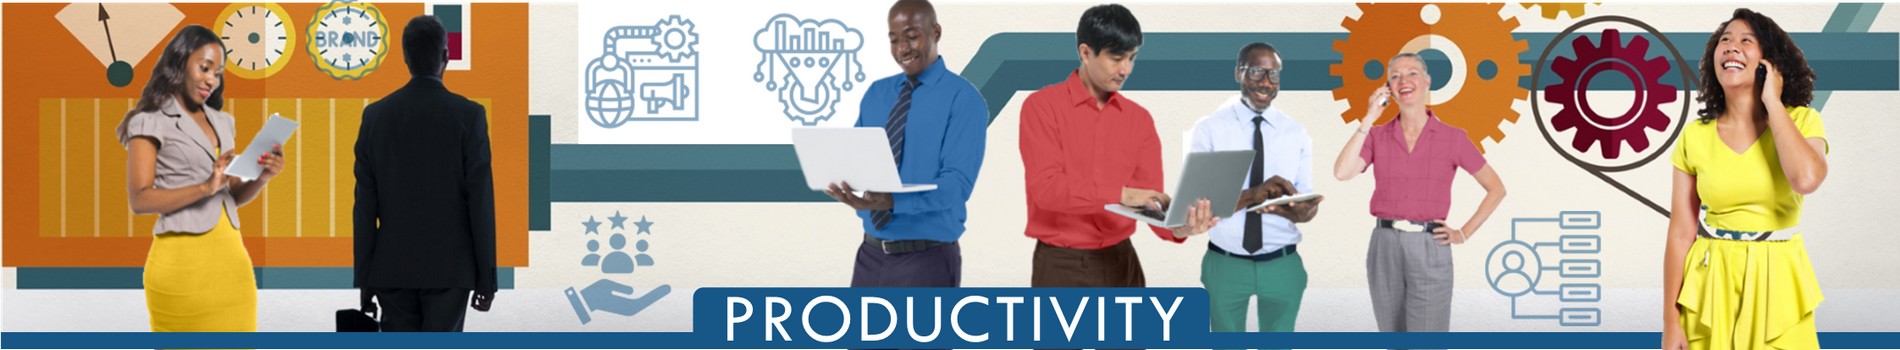 Increasing productivity with Marketing Automation